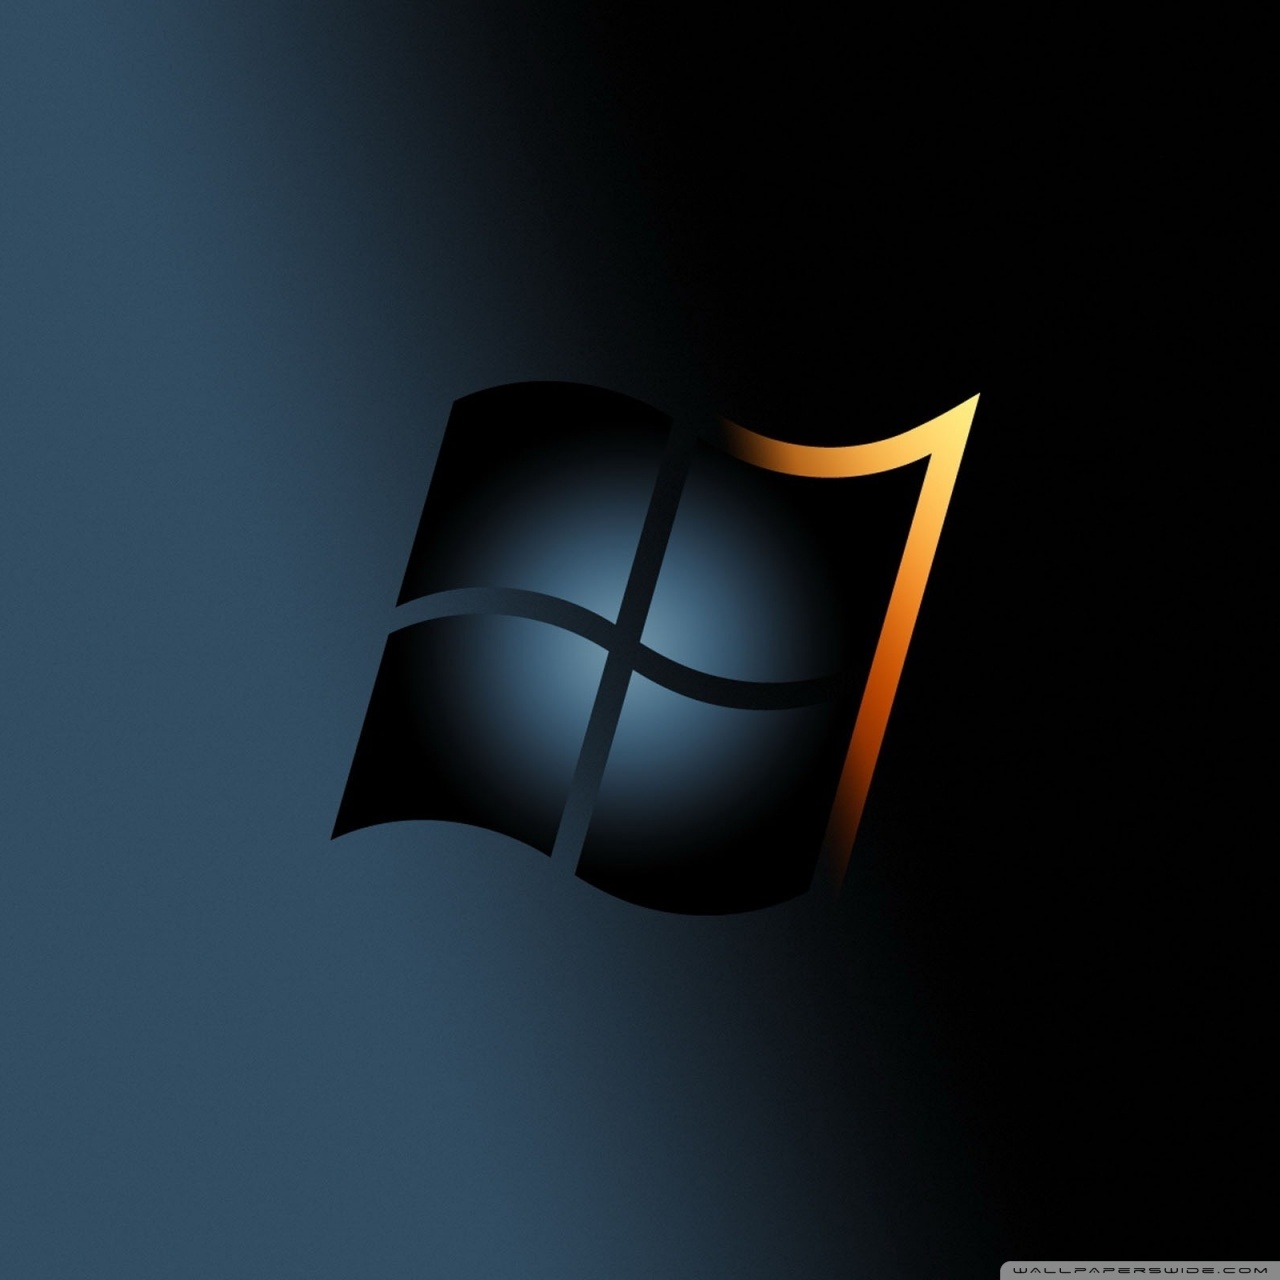 Windows 7 Professional Wallpapers